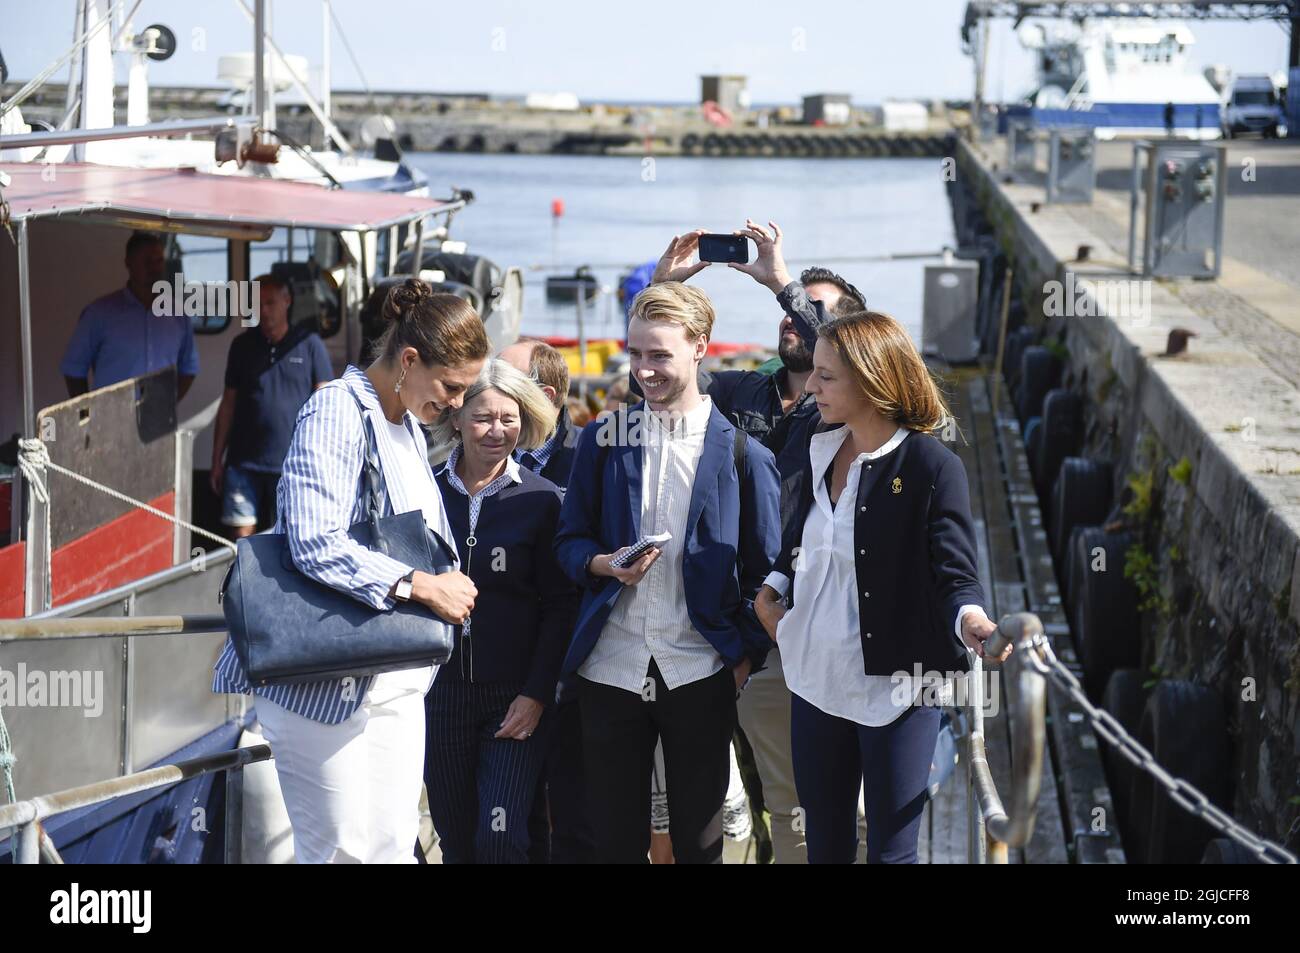 SIMRISHAMN 2019-08-22 Crown Princess Victoria during her visit to the  Centre for Marine Research in Simrishamn, Sweden on Thursday, August 22,  2019 Foto: Jens Christian / EXP / TT / Kod: 7172 ** OUT Aftonbladet **  Stock Photo - Alamy